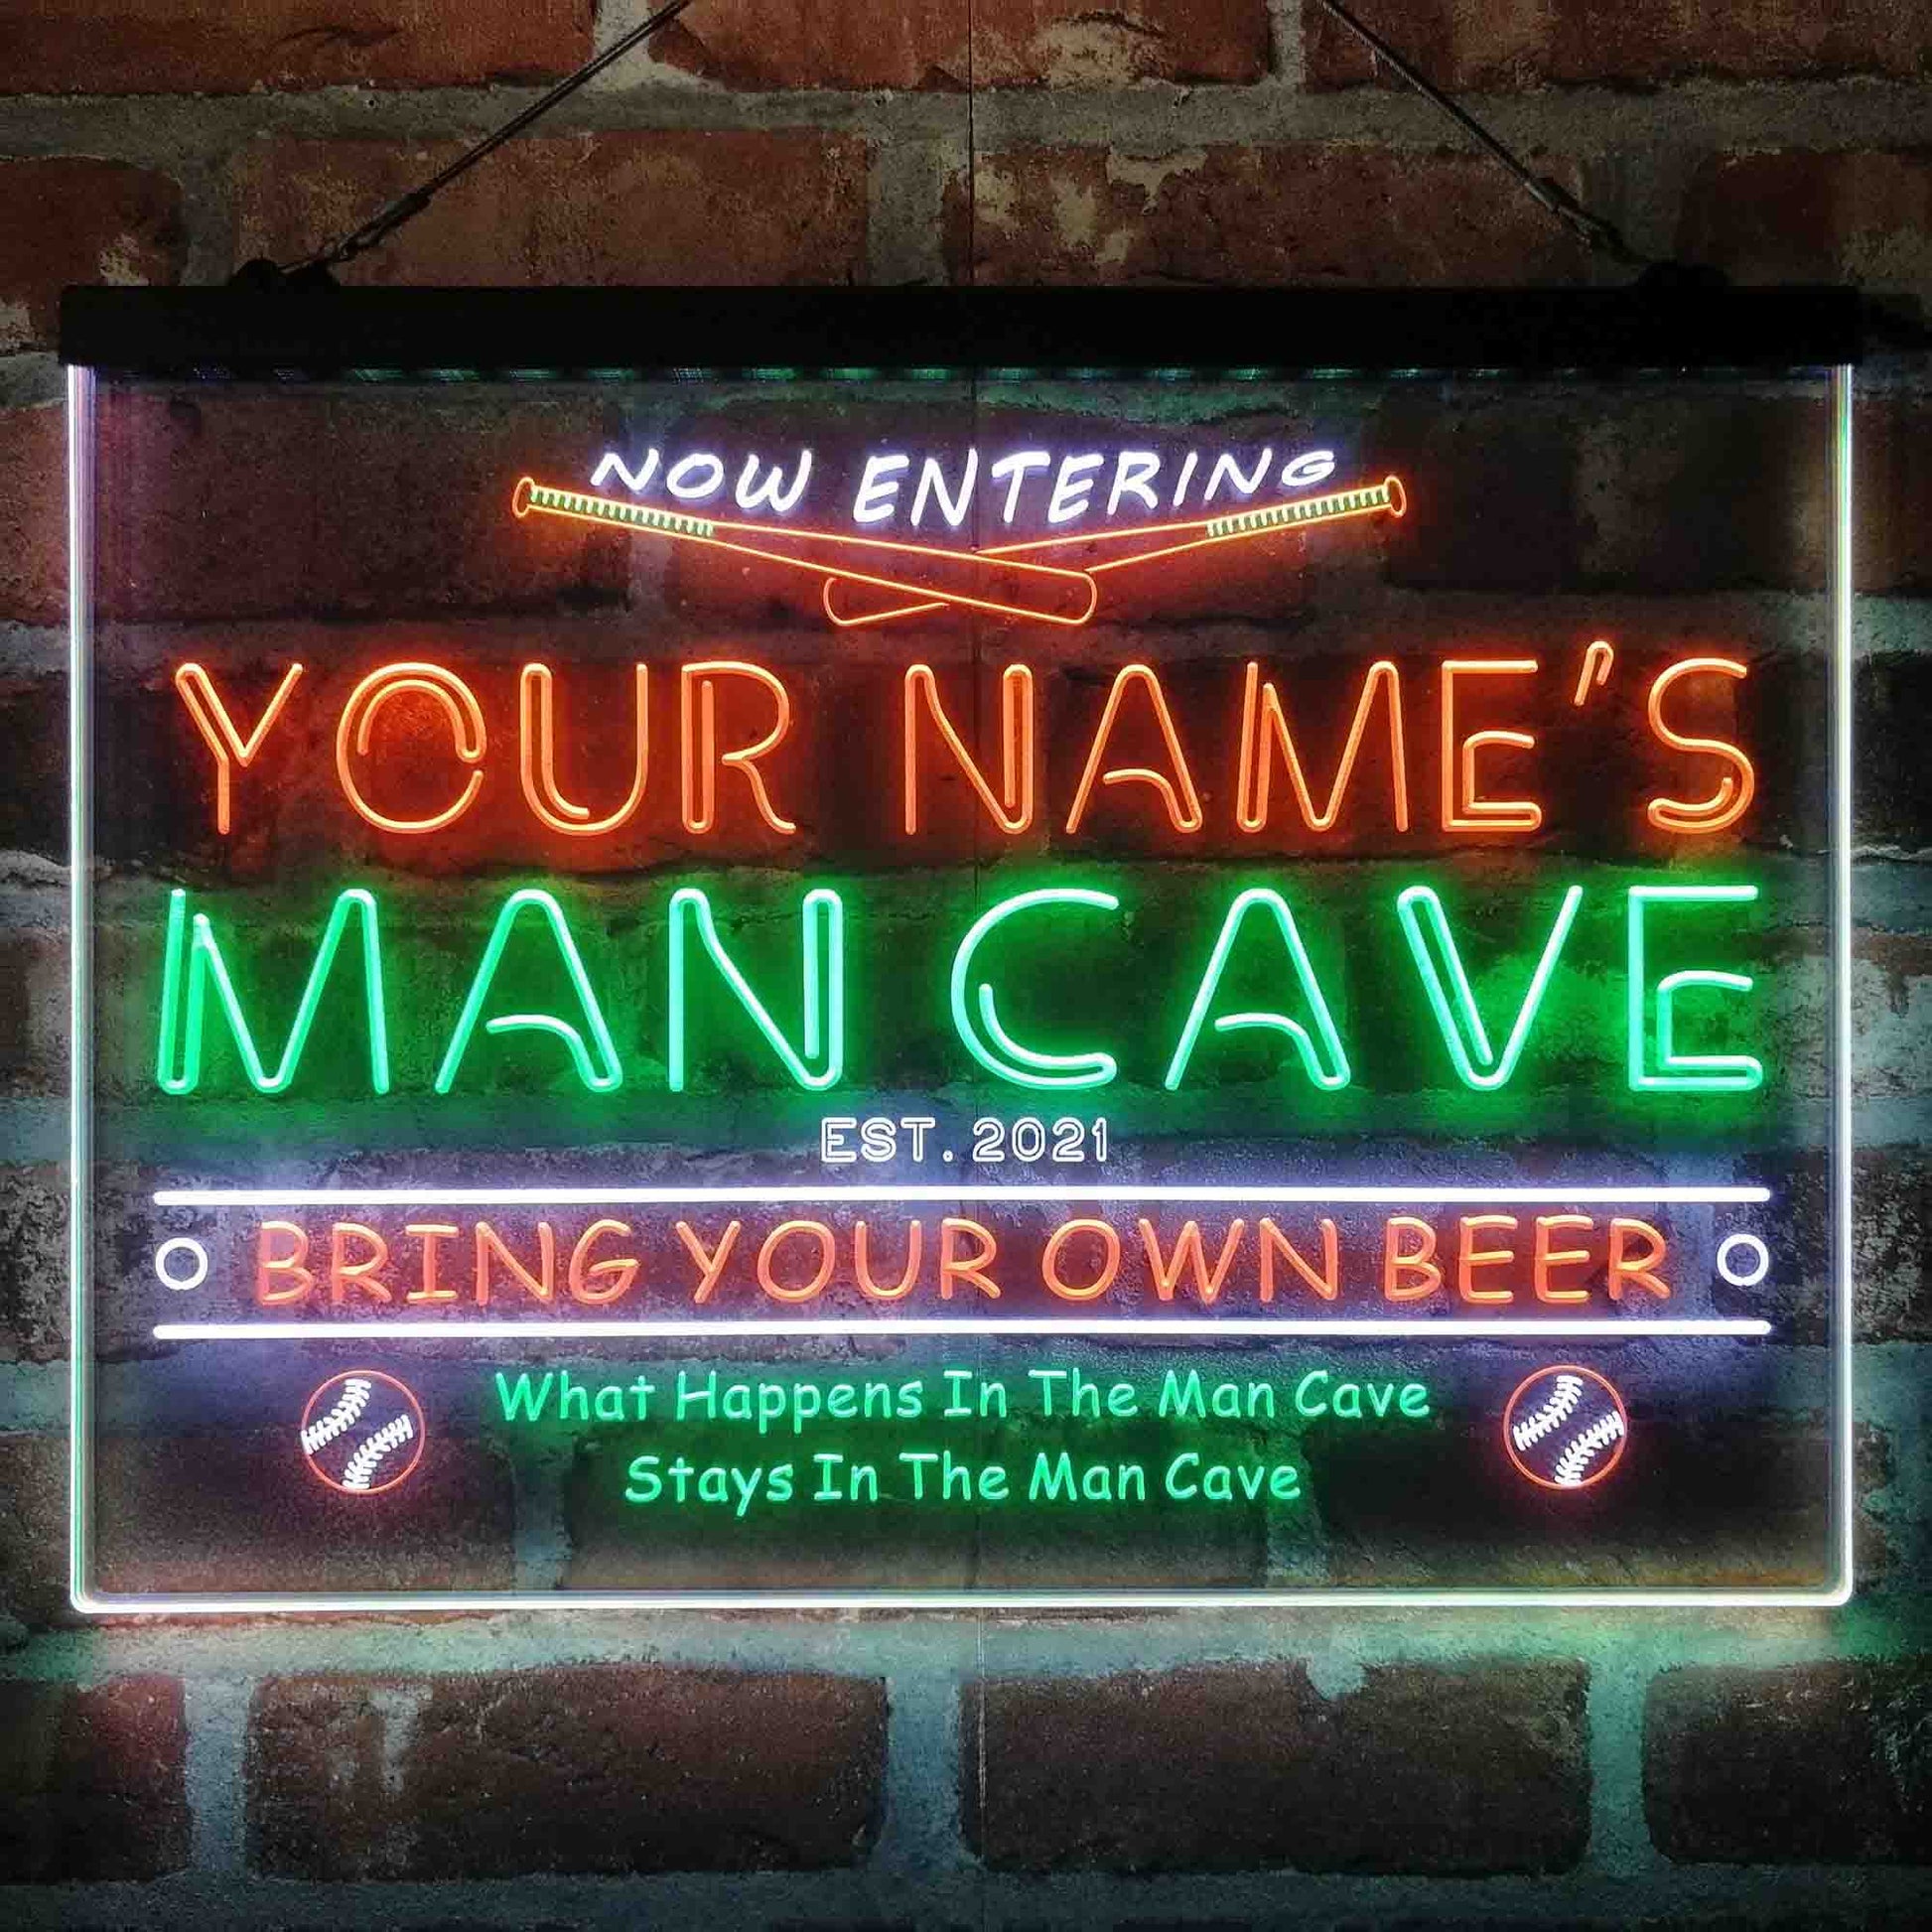 Personalized Baseball Man Cave 3-Color LED Neon Light Sign - Way Up Gifts